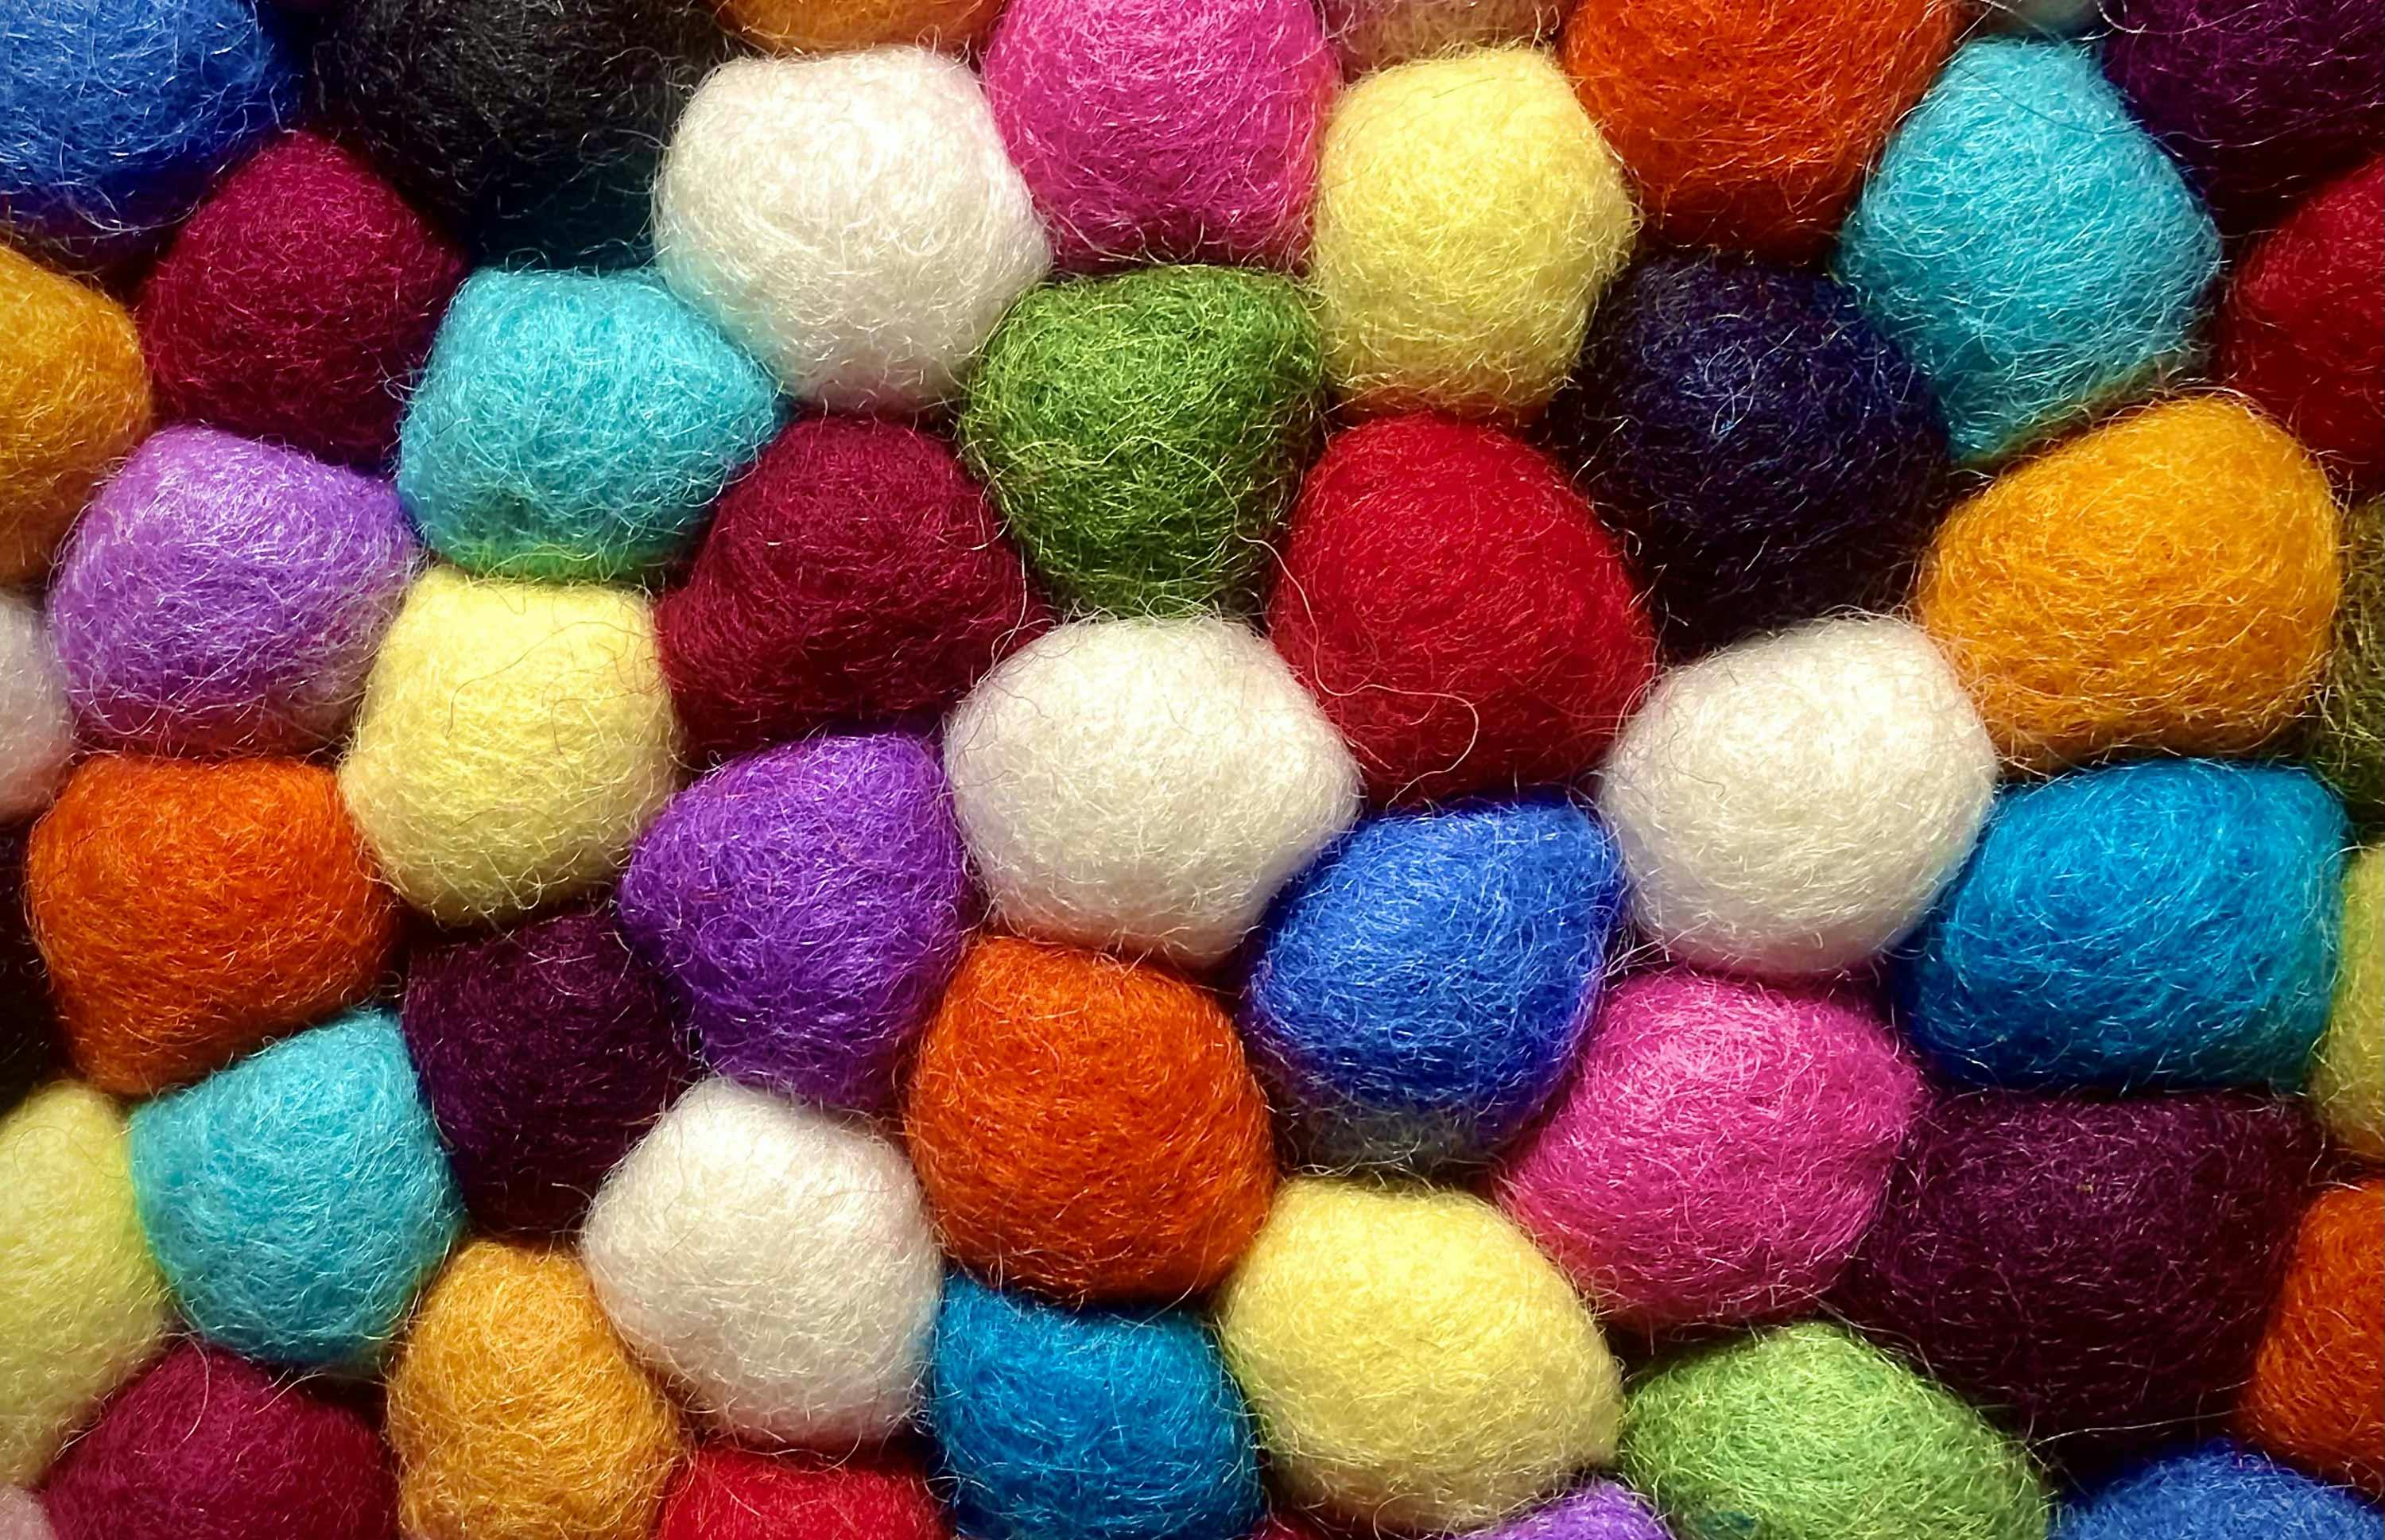 Felt: The Wonder Fabric For Crafters
